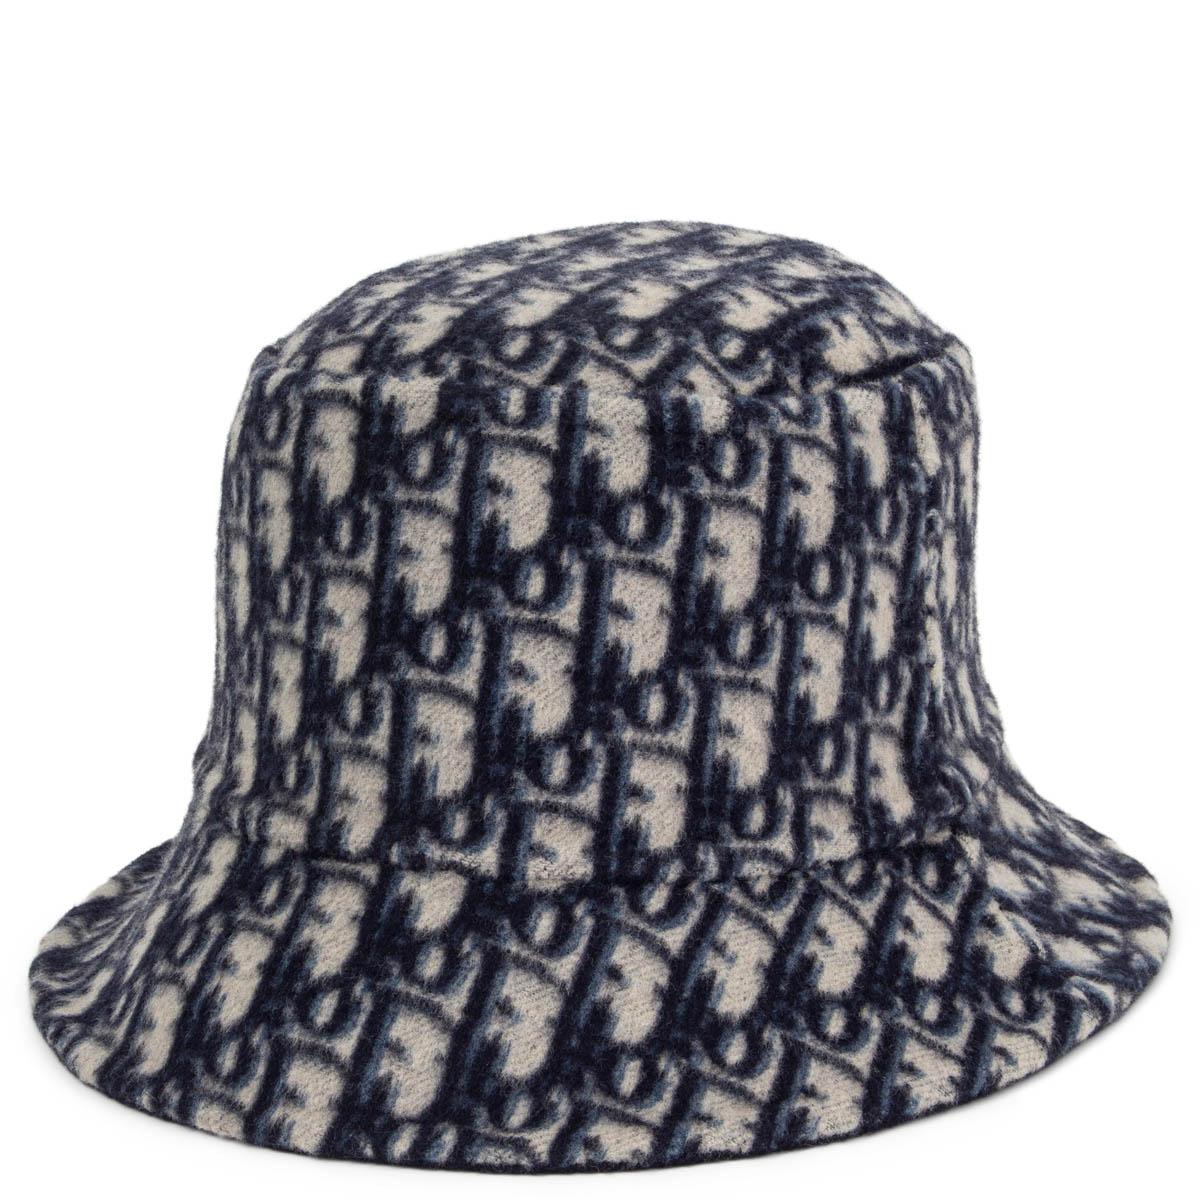 100% authentic Christian Dior Oblique reversible small brim bucket hat in navy and light grey wool (99%) and silk (1%). Has been worn once and is in virtually new condition. Comes with dust bag. 

Measurements
Tag Size	58
Inside Circumference	58cm